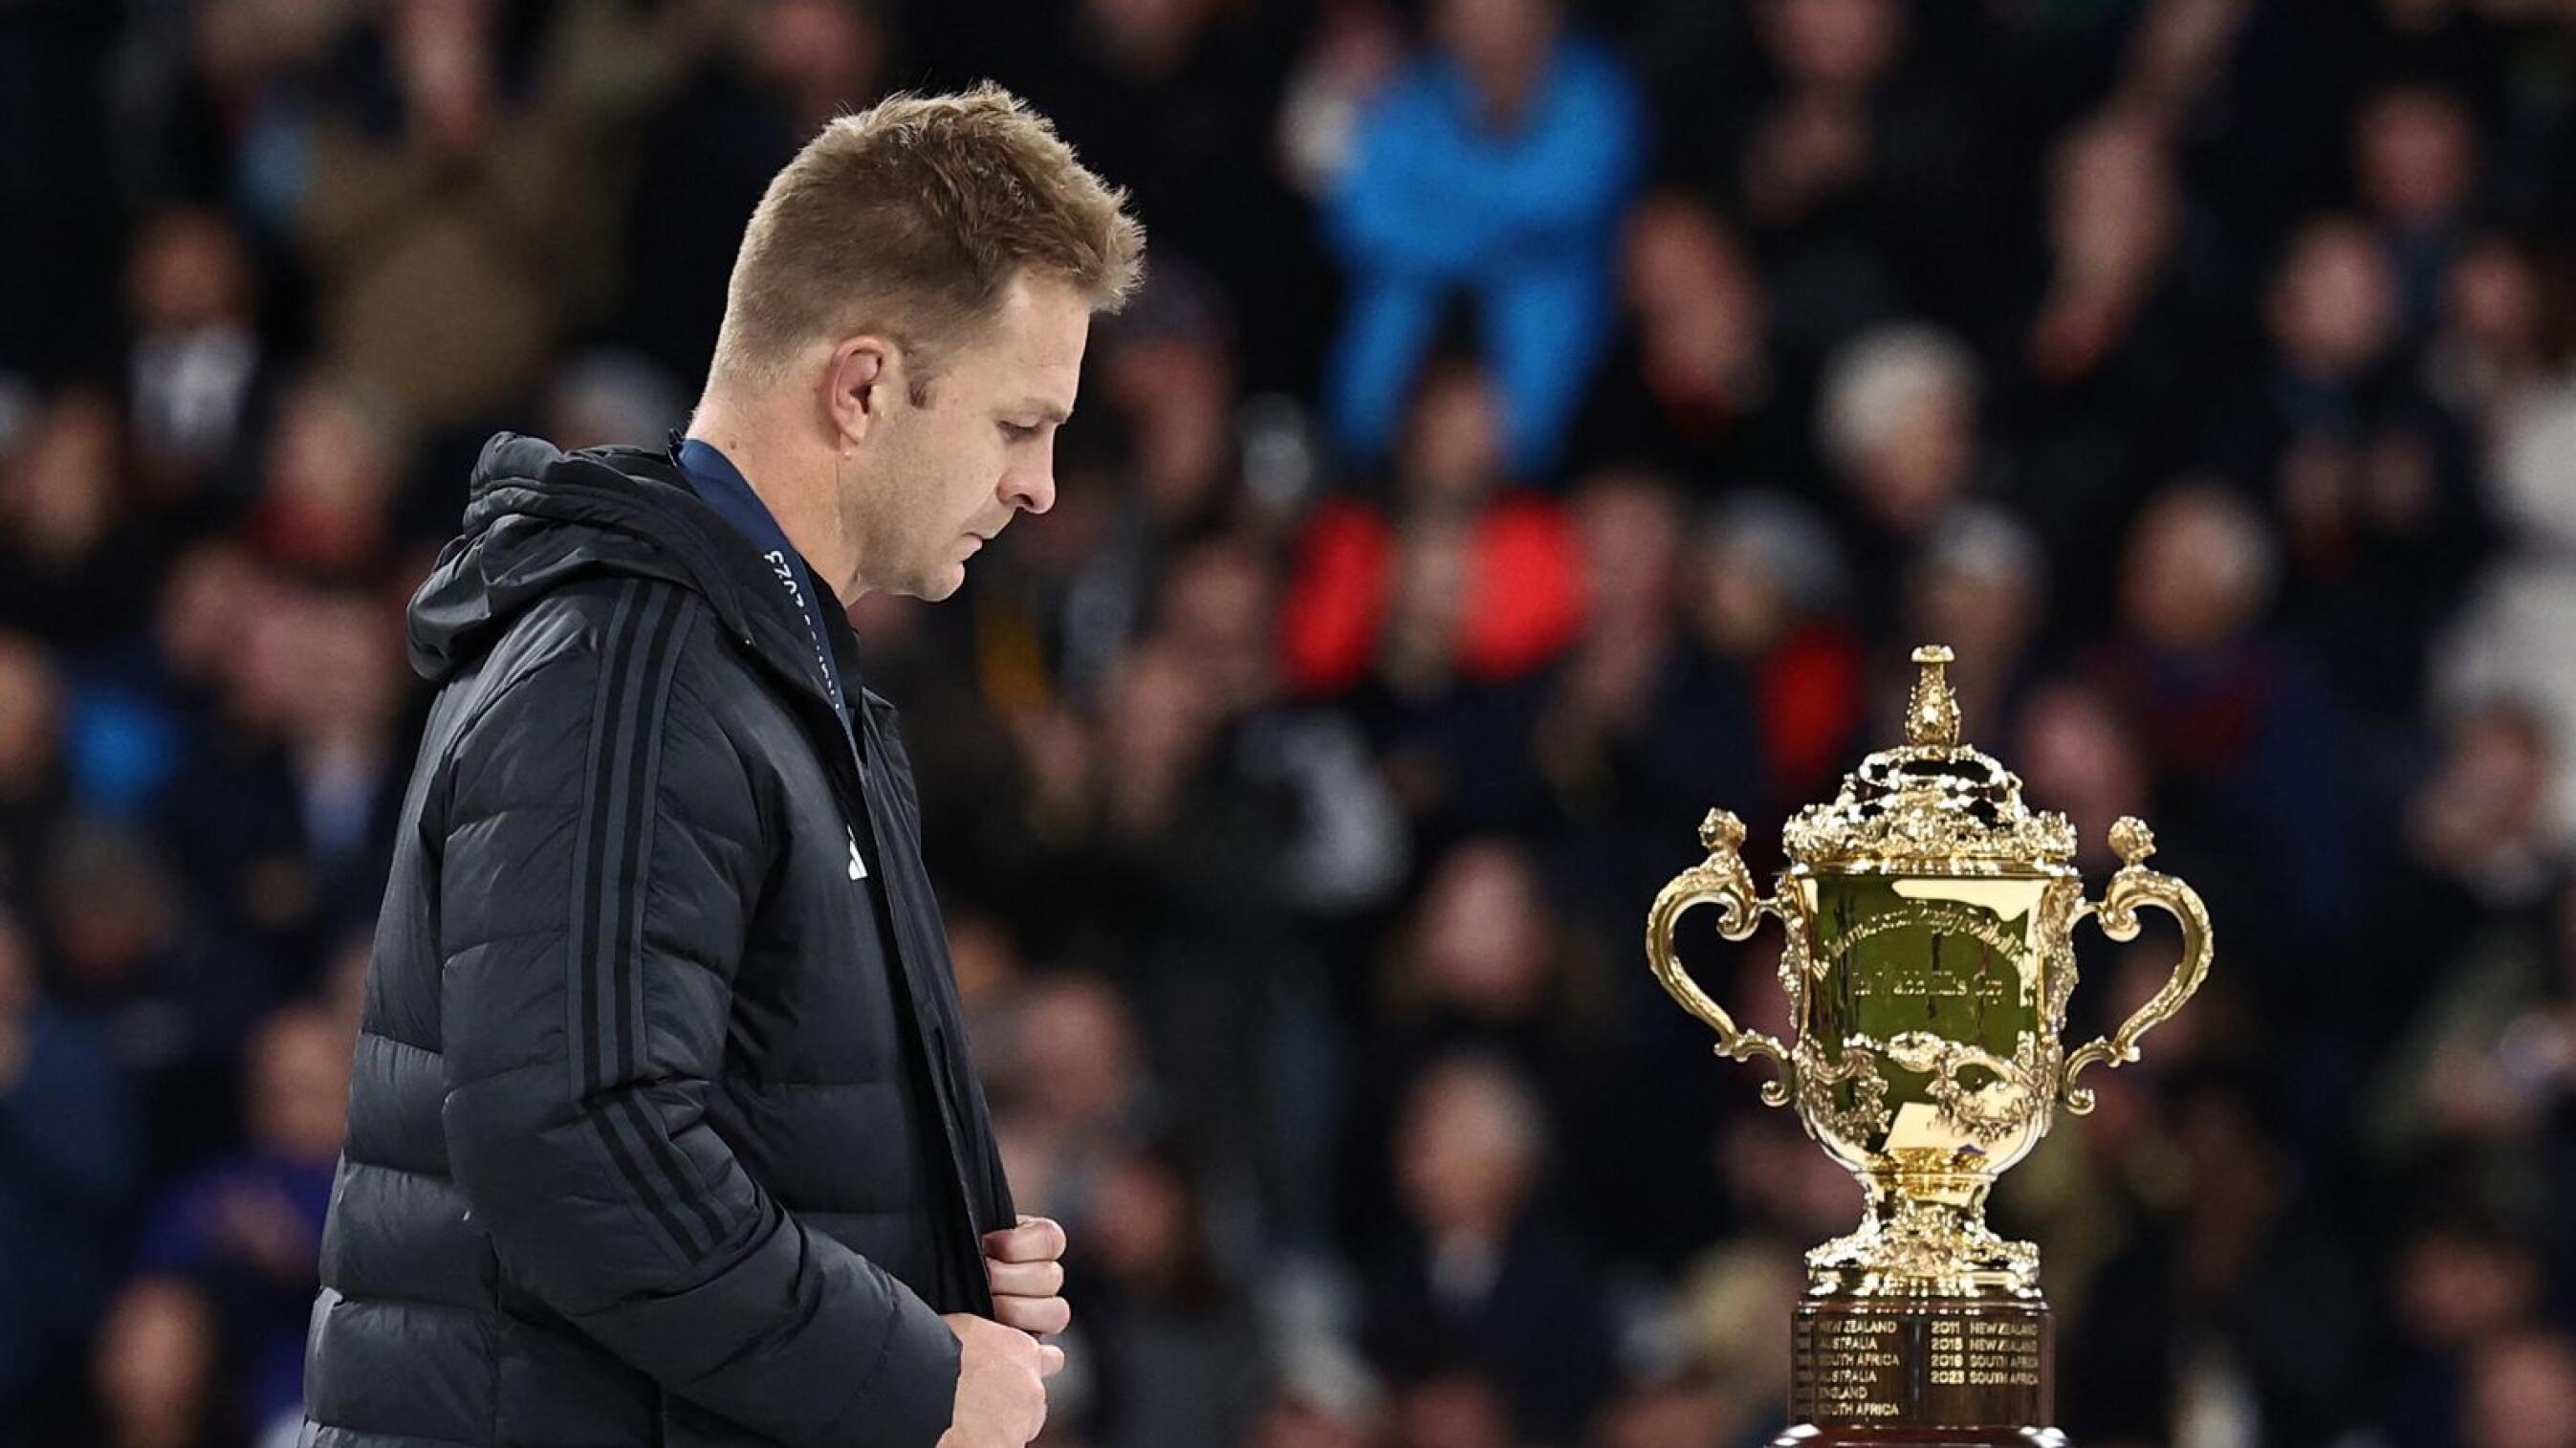 New Zealand's openside flanker and captain Sam Cane reacts as he walks past the Web Ellis Cup after South Africa won the France 2023 Rugby World Cup Final match between New Zealand and South Africa at the Stade de France in Saint-Denis, on the outskirts of Paris